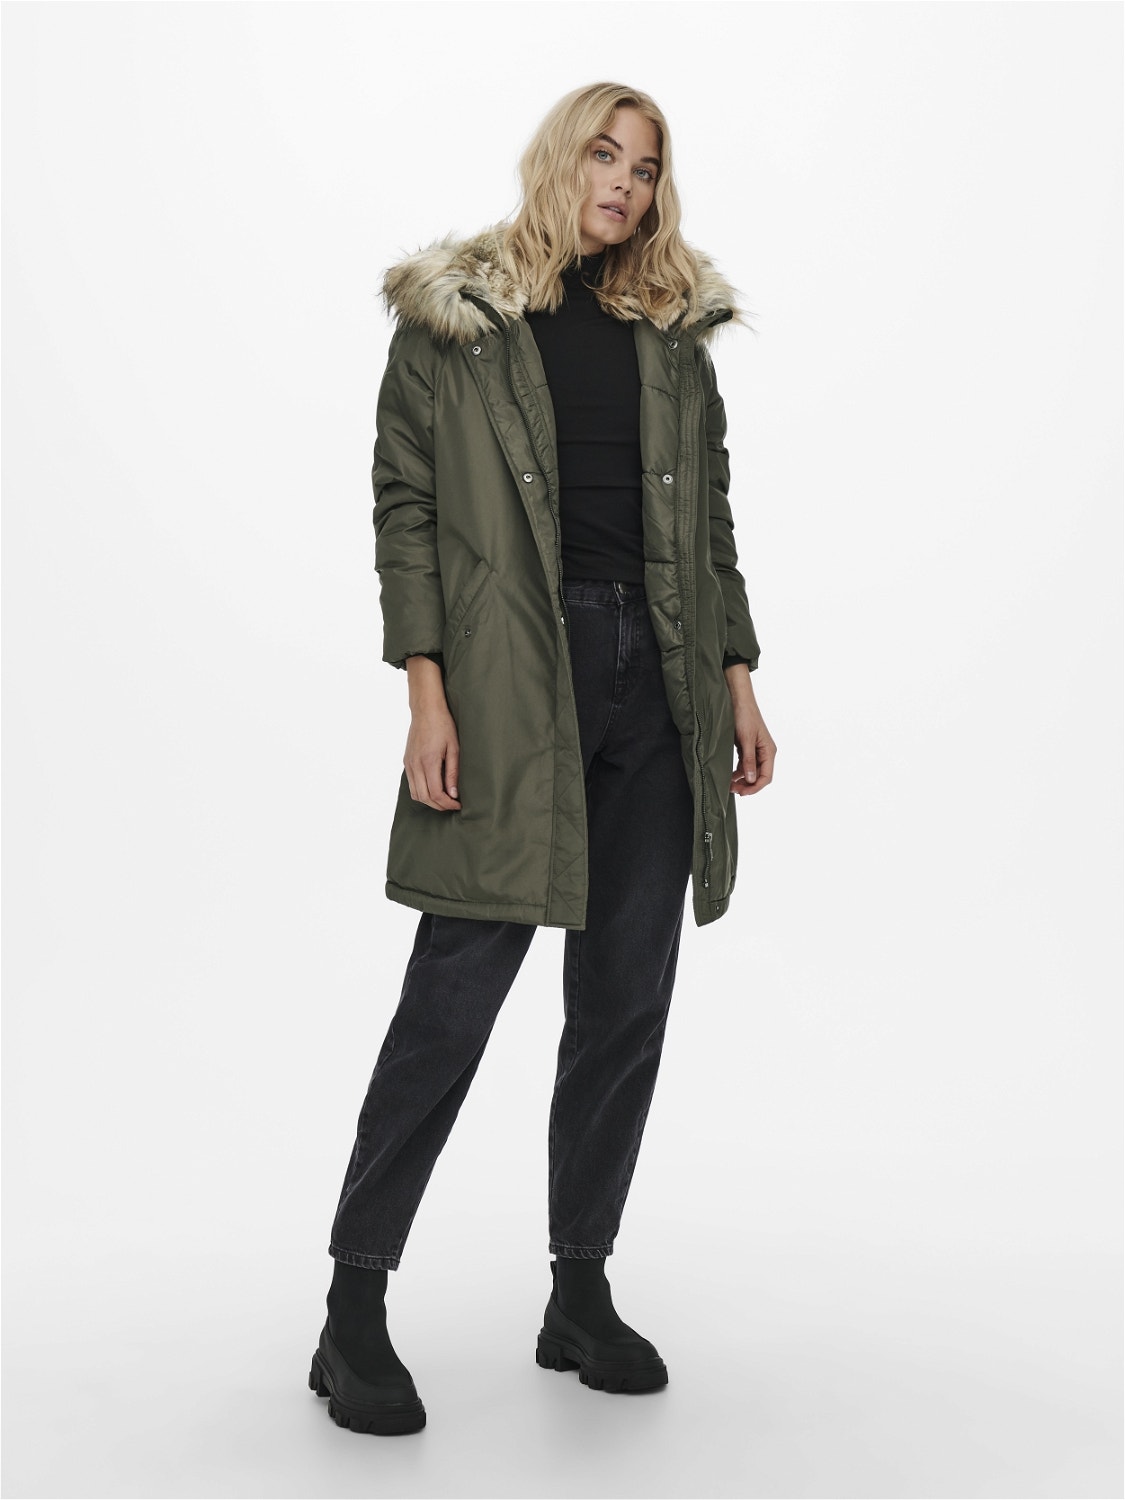 Members Only Faux Fur Lined Hooded Parka, $229, Urban Outfitters